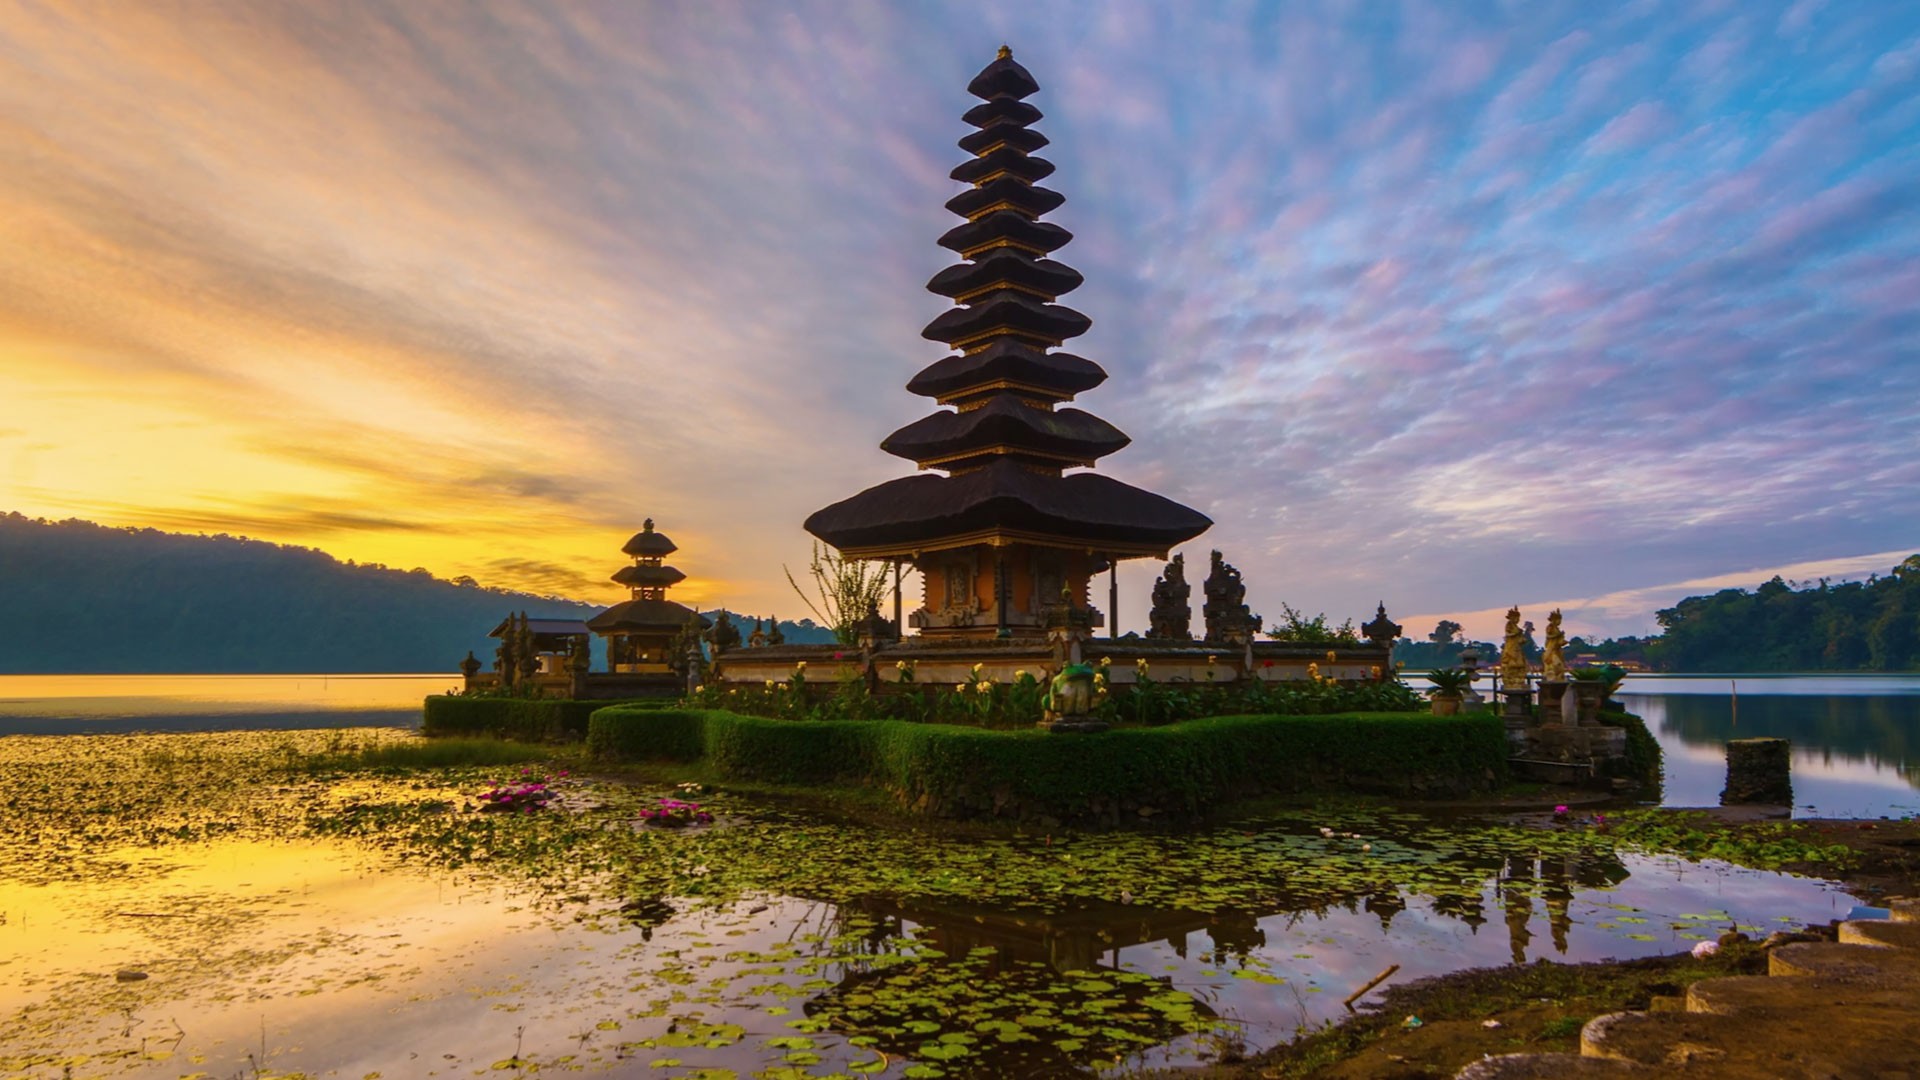 General 1920x1080 nature landscape architecture building Asian architecture temple Bali Indonesia island water lake plants sunset clouds reflection Hindu Architecture Hinduism Asia sunlight